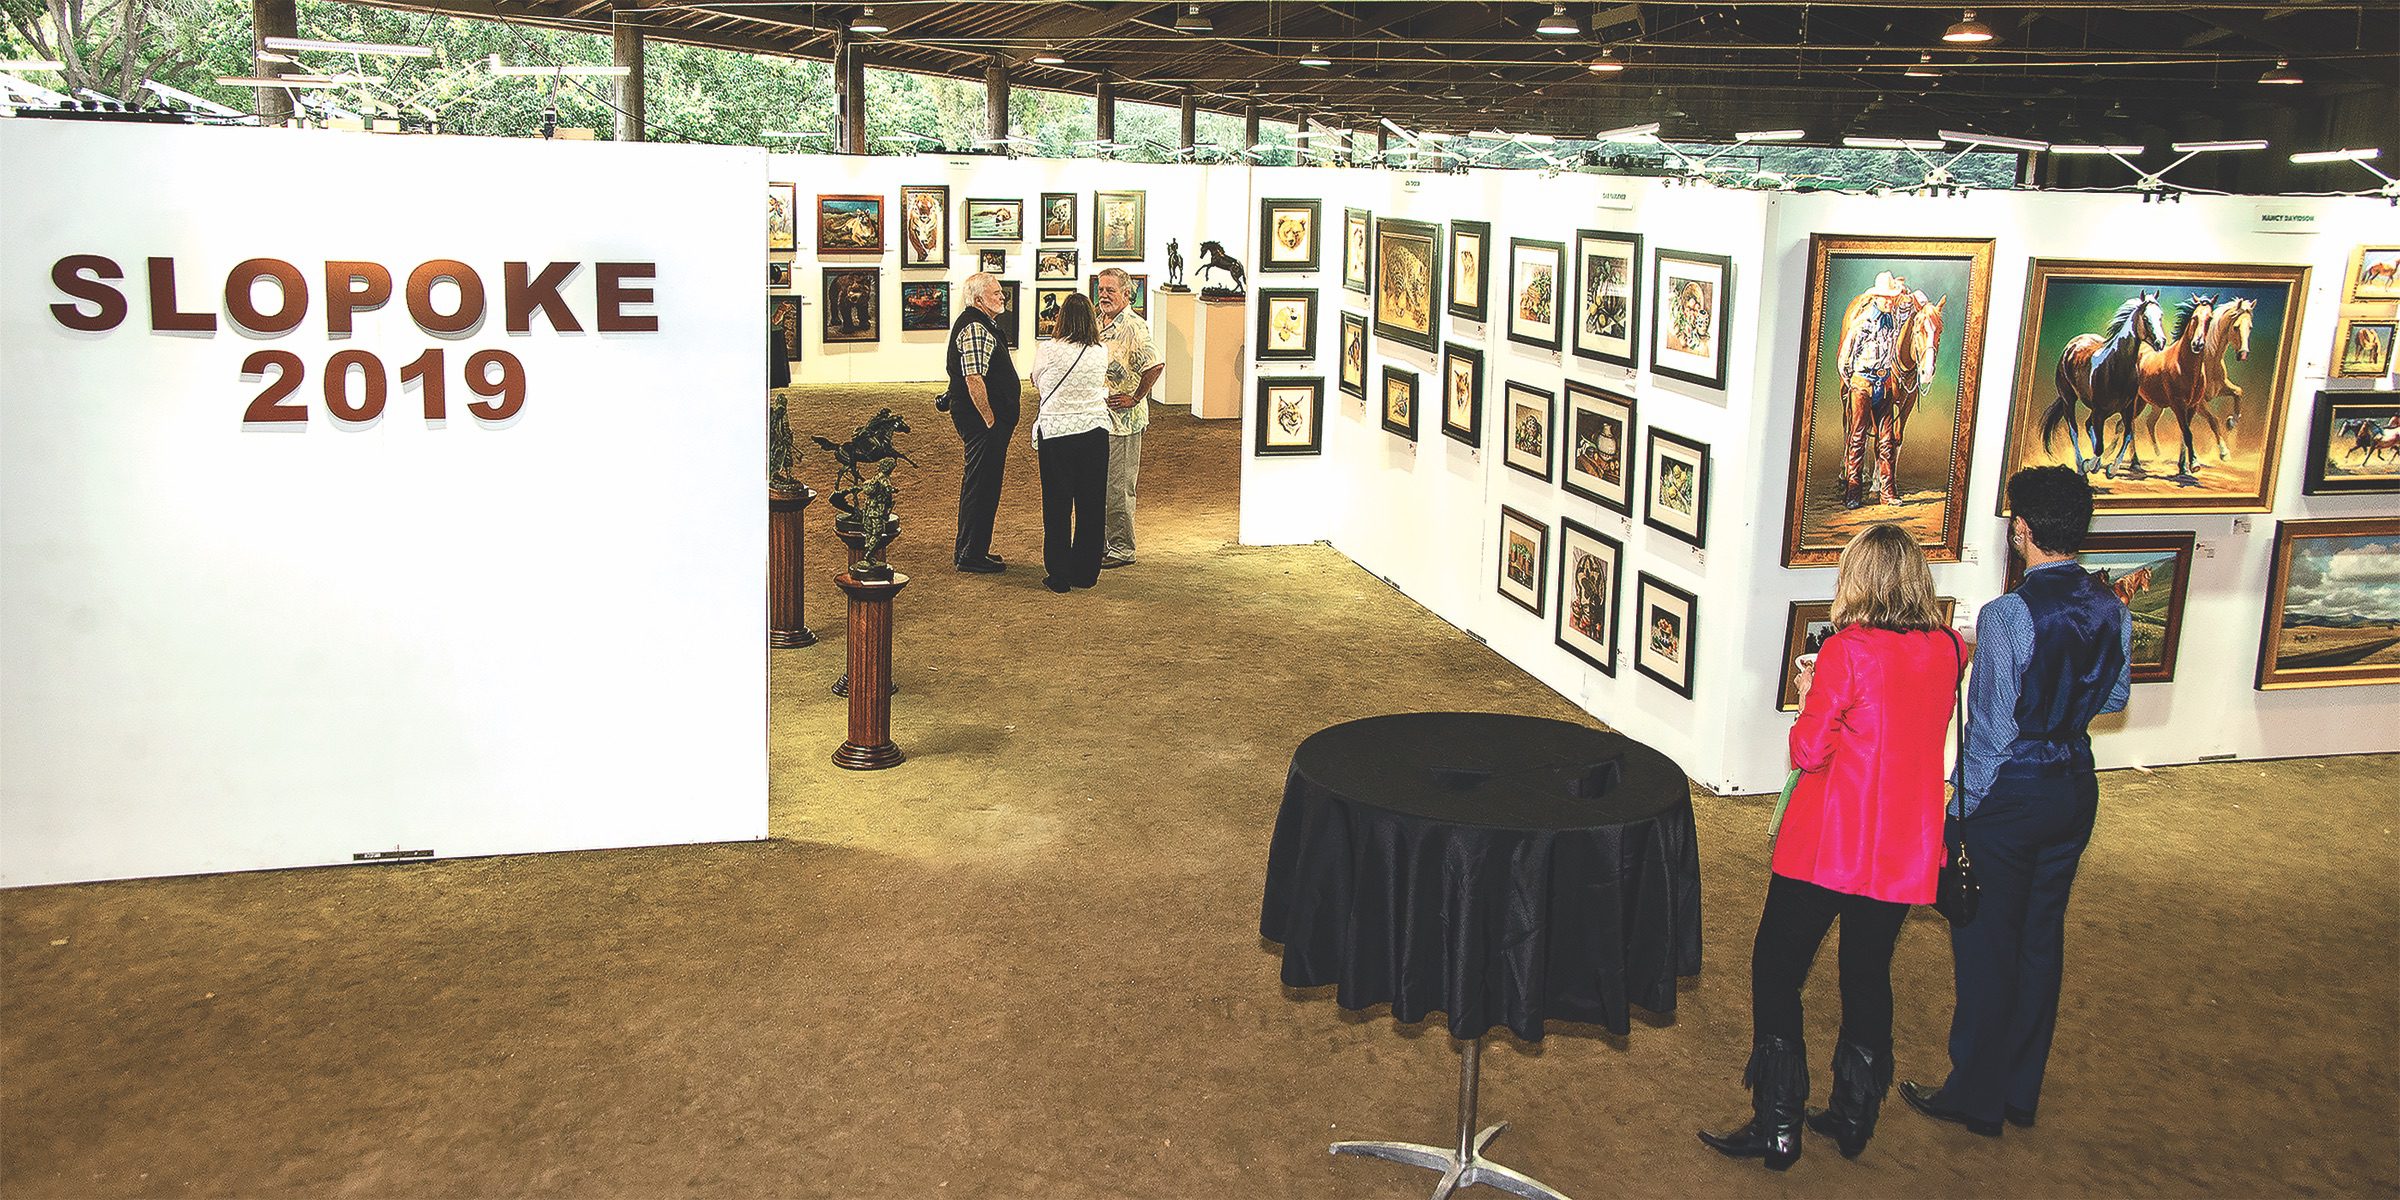 SLOPOKE Art Exhibition and Sale planned at Flag Is Up Farms